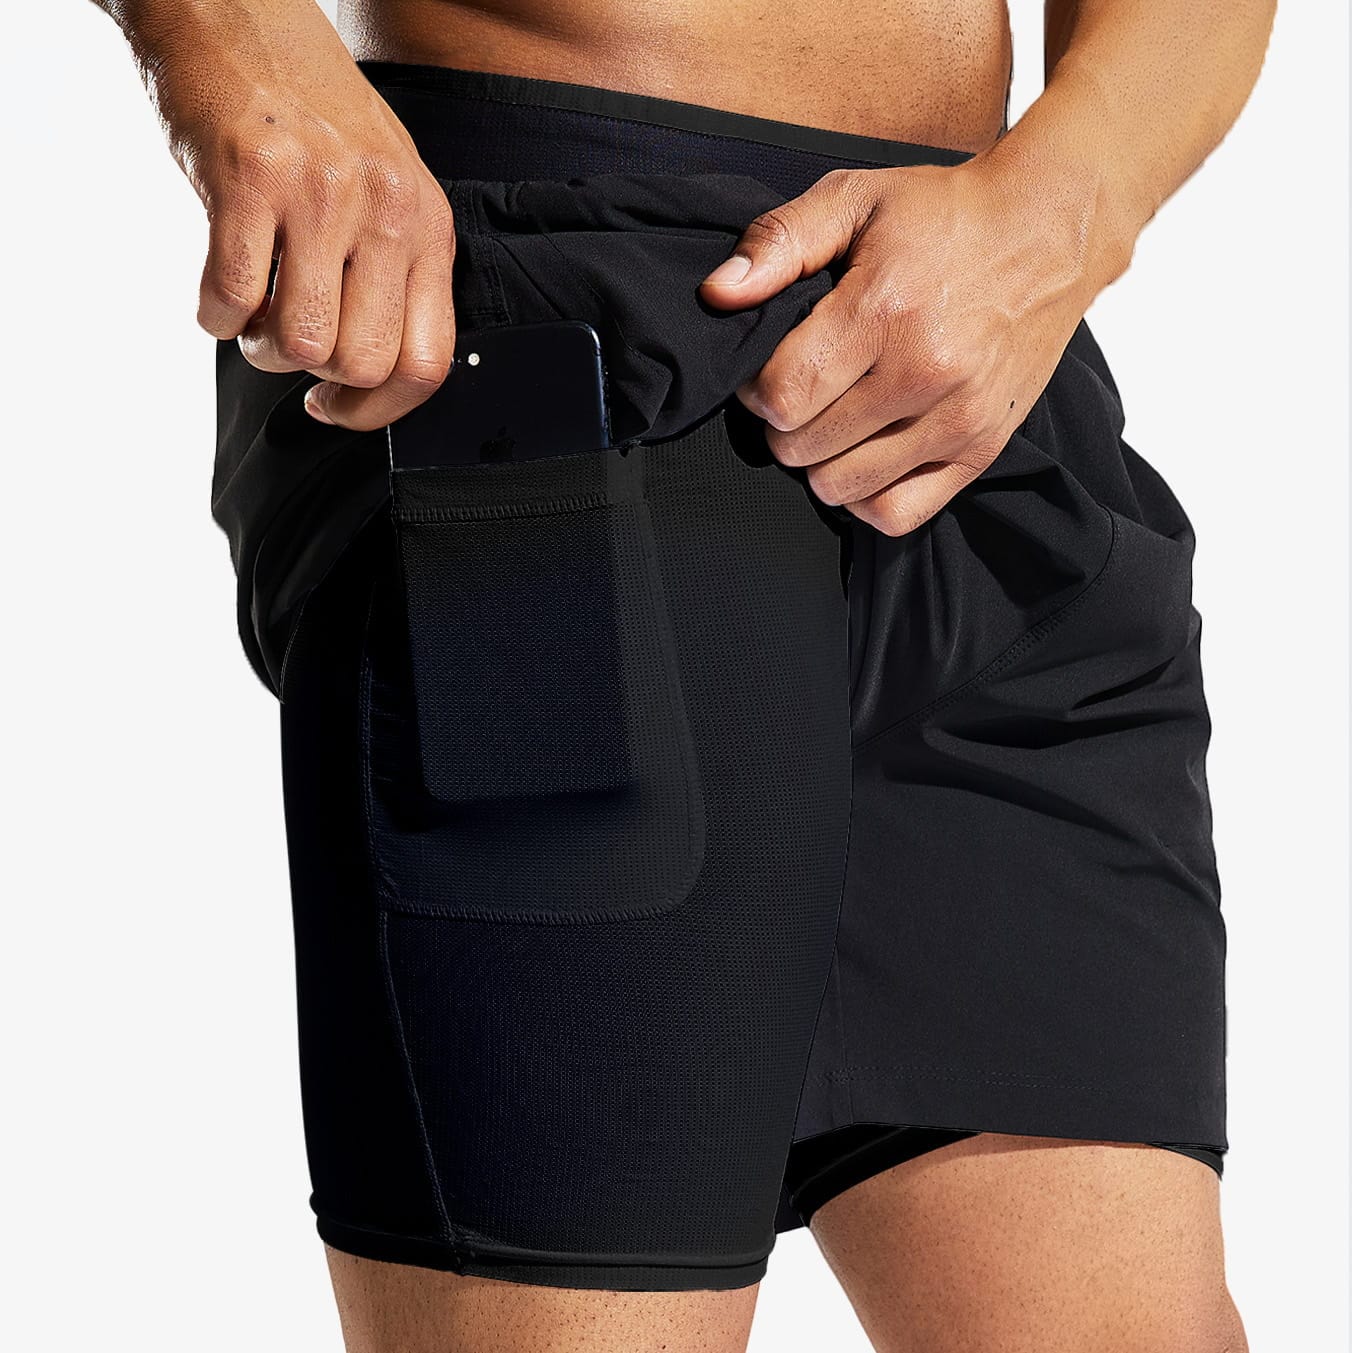 Men's 2 in 1 Running Shorts with Liner 5 Quick Dry Athletic Shorts - Black  Black / S